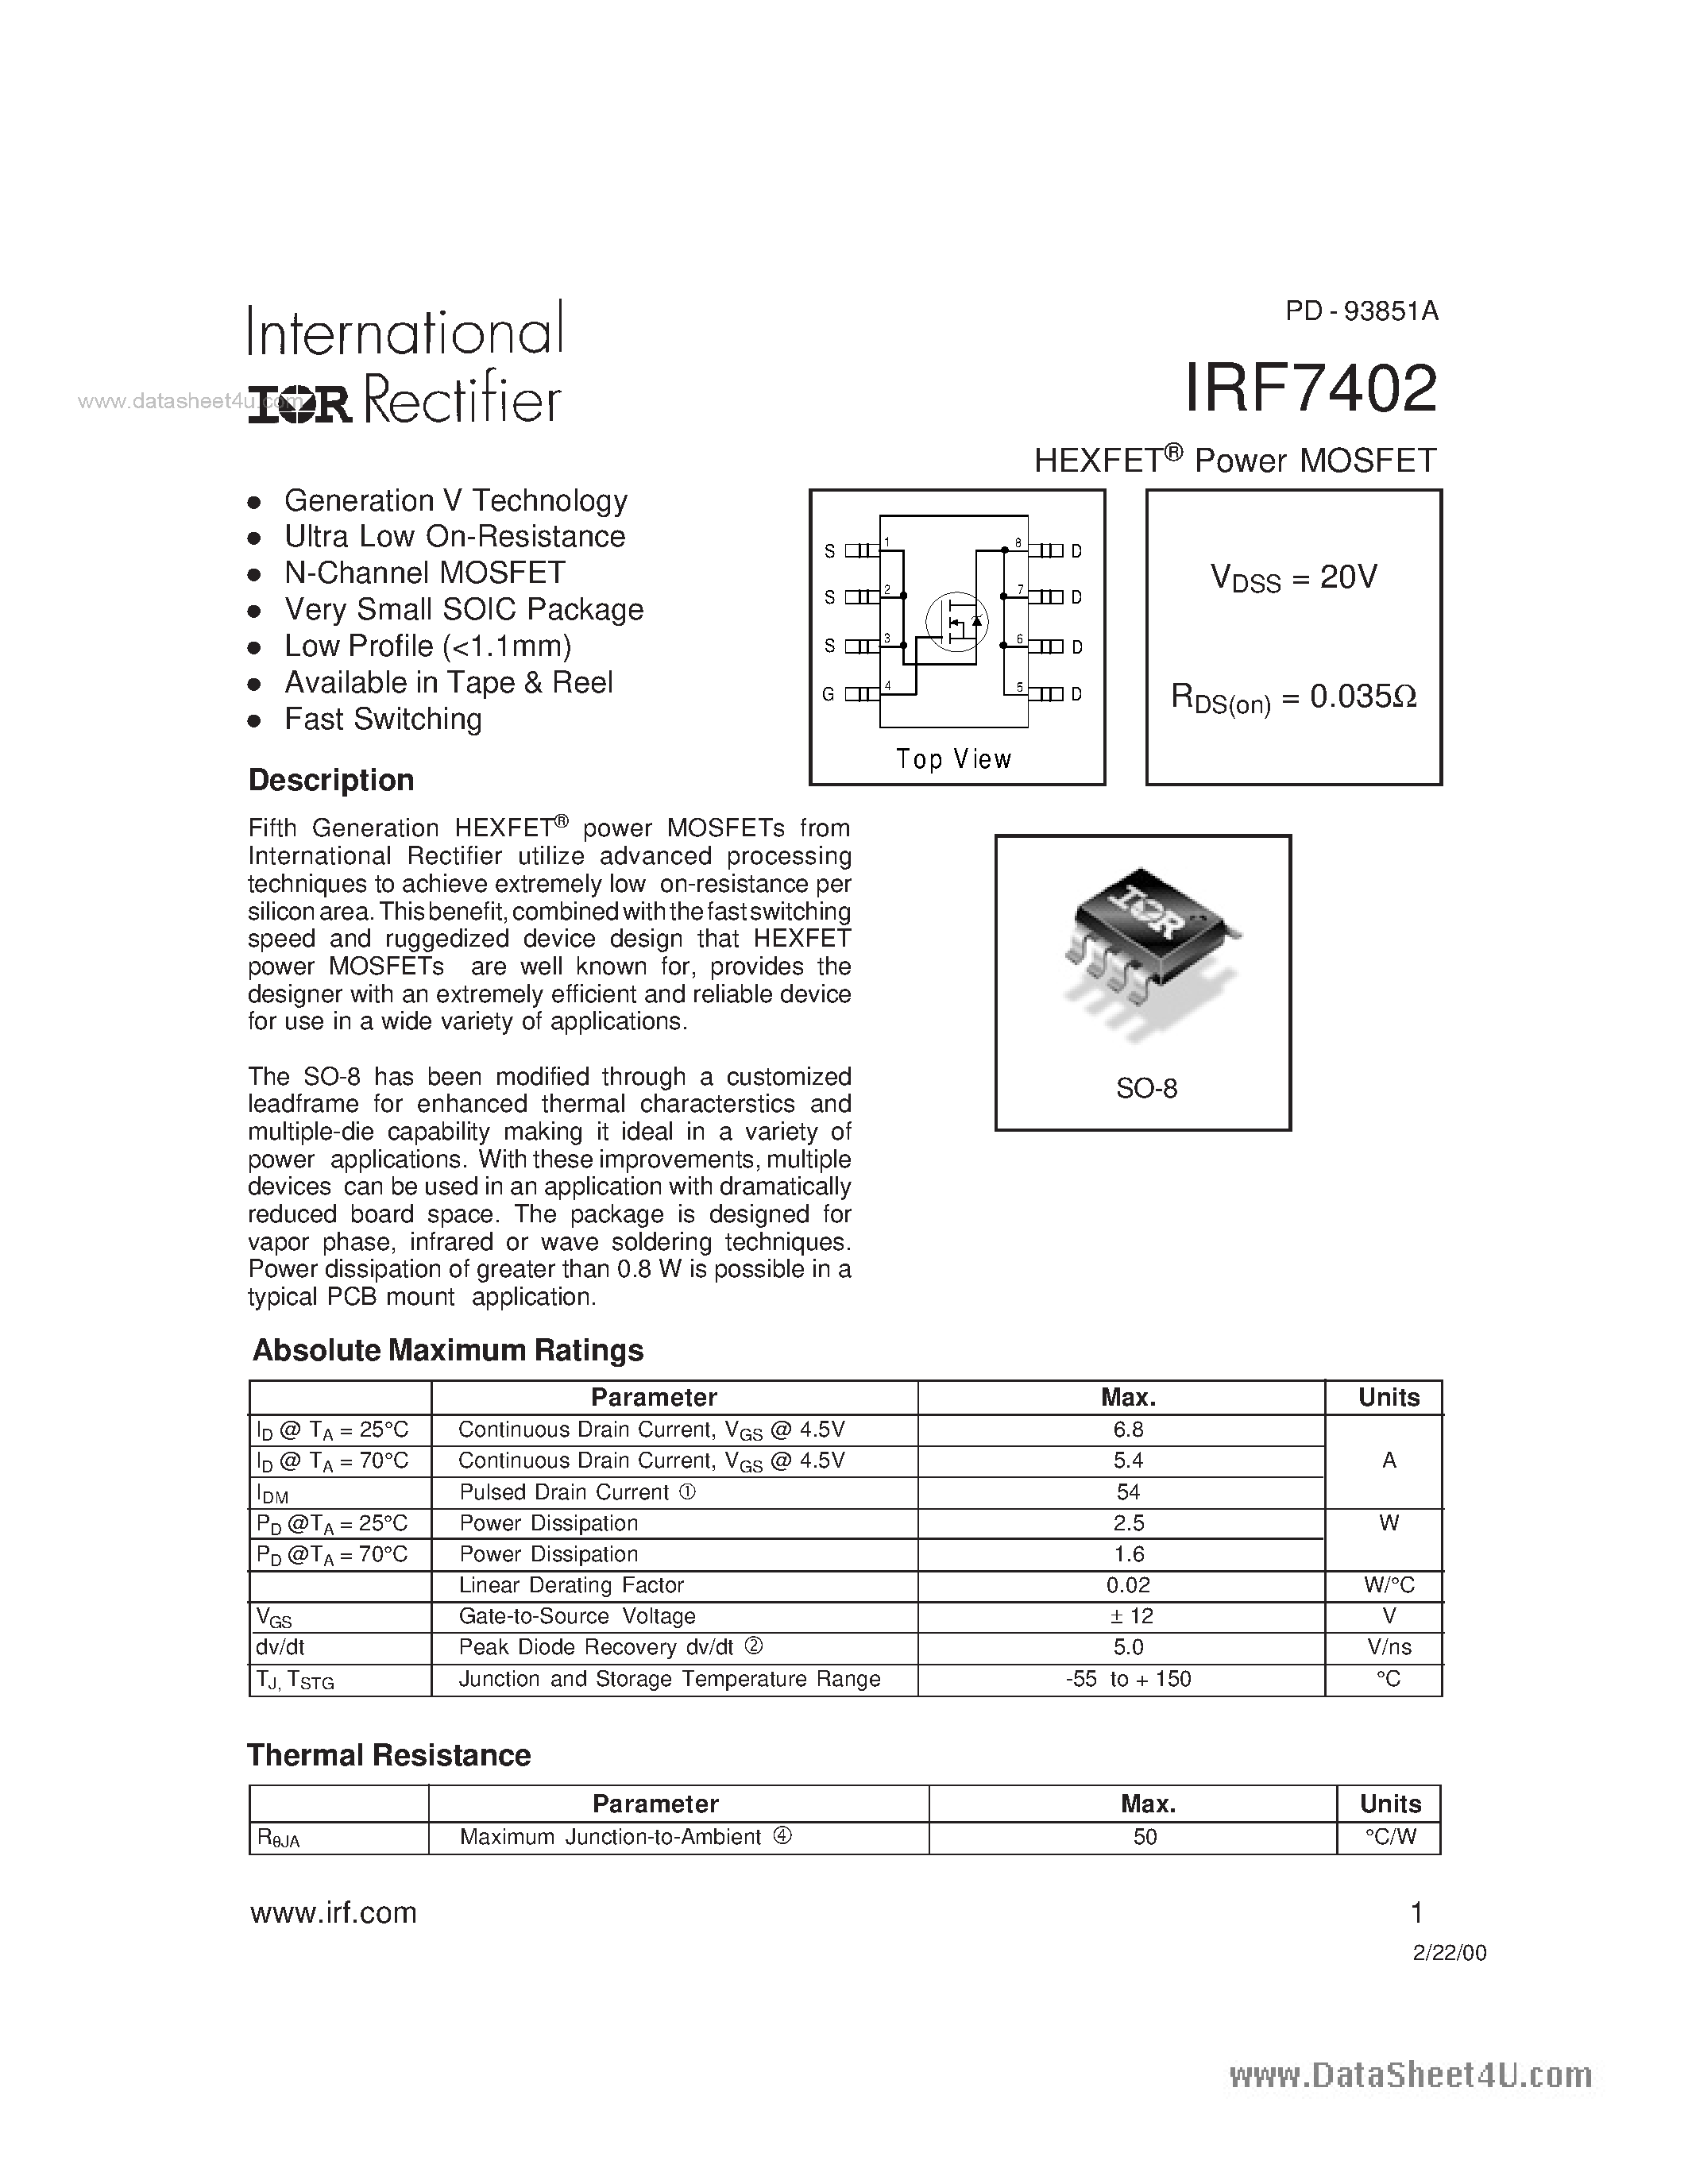 Datasheet IRF7402 - HEXFET Power MOSFET page 1